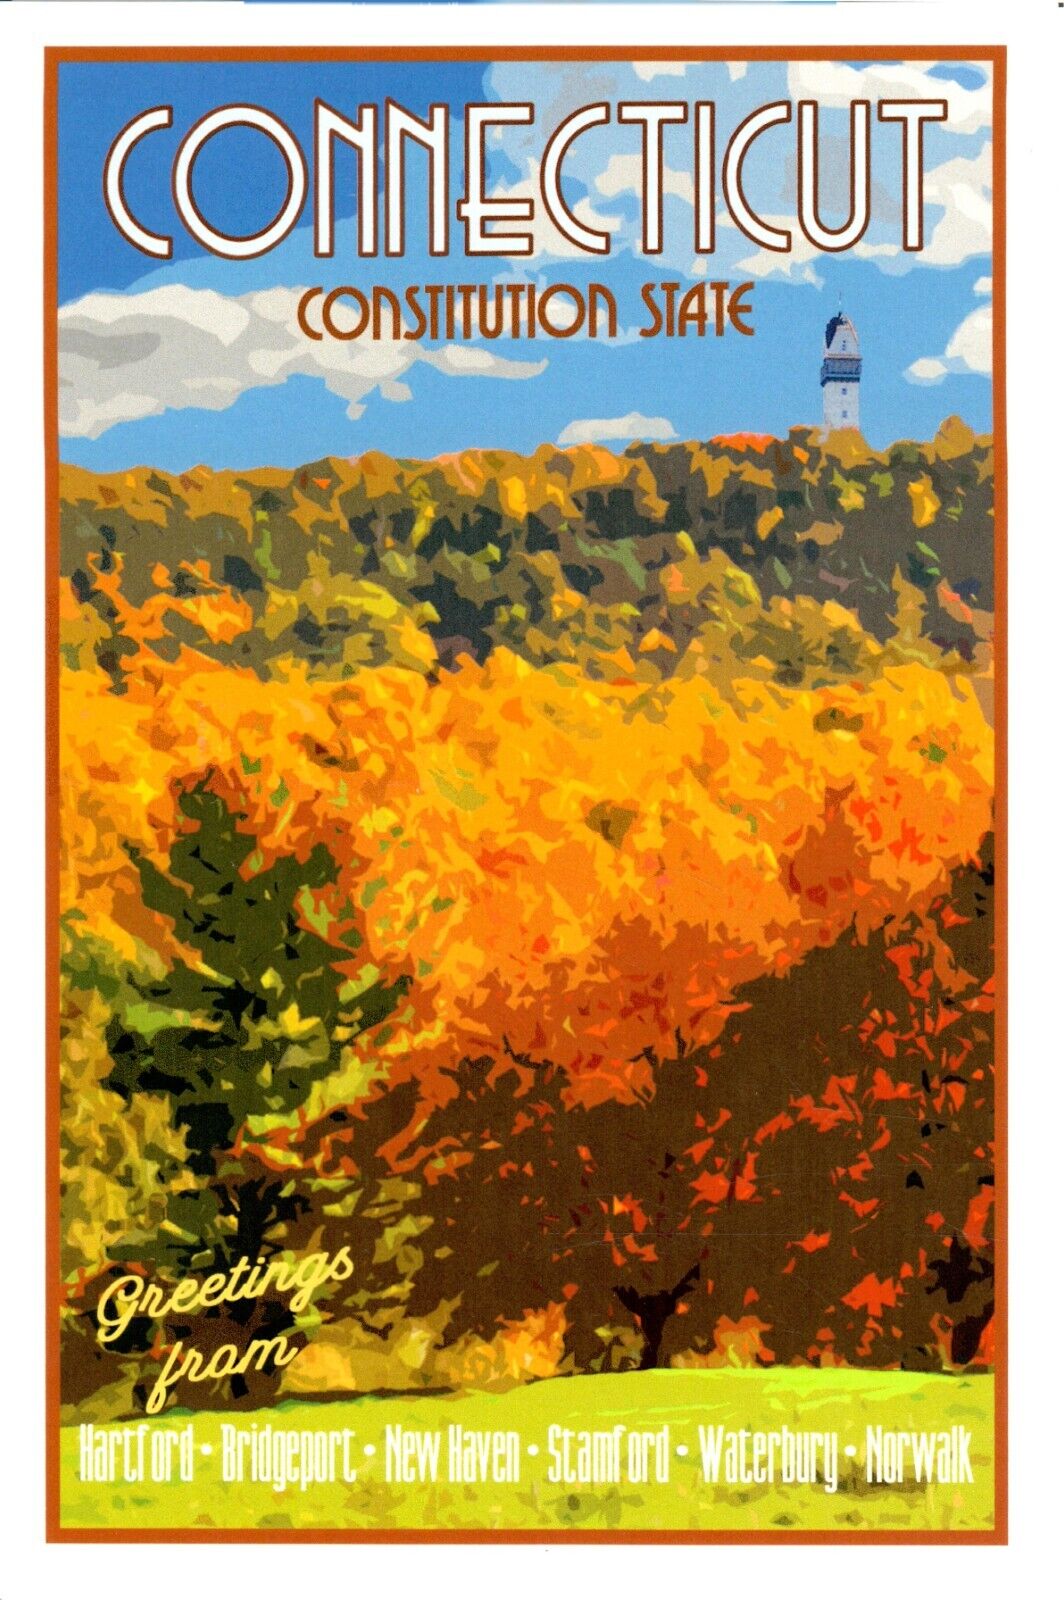 NEW 4x6 Postcard Connecticut Constitution State Greetings From Fall unposted